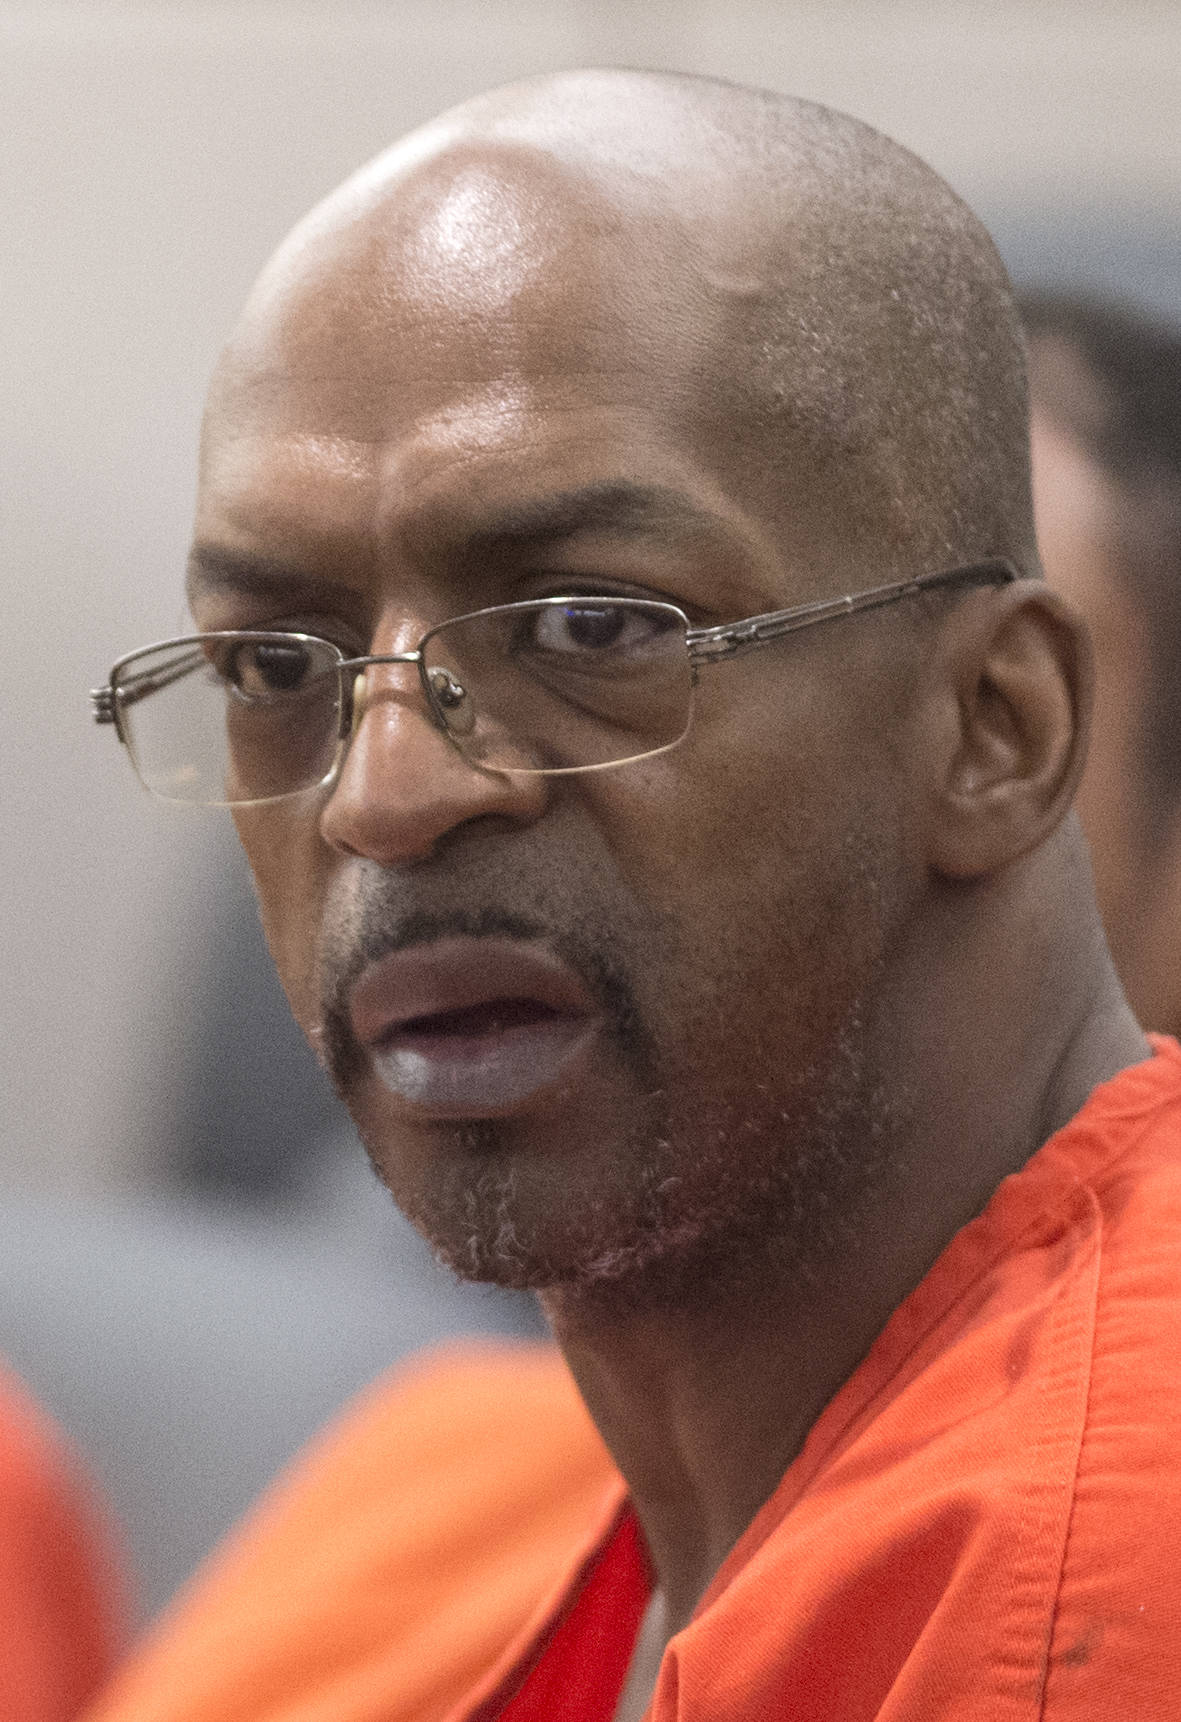 Mack Arthur Parker, 51, appears in Juneau District Court for an arraignment on burglary charges on Wednesday, July 5, 2017. Parker is accused of breaking into the Mendenhall Glacier Visitor Center on Sunday. (Michael Penn | Juneau Empire)